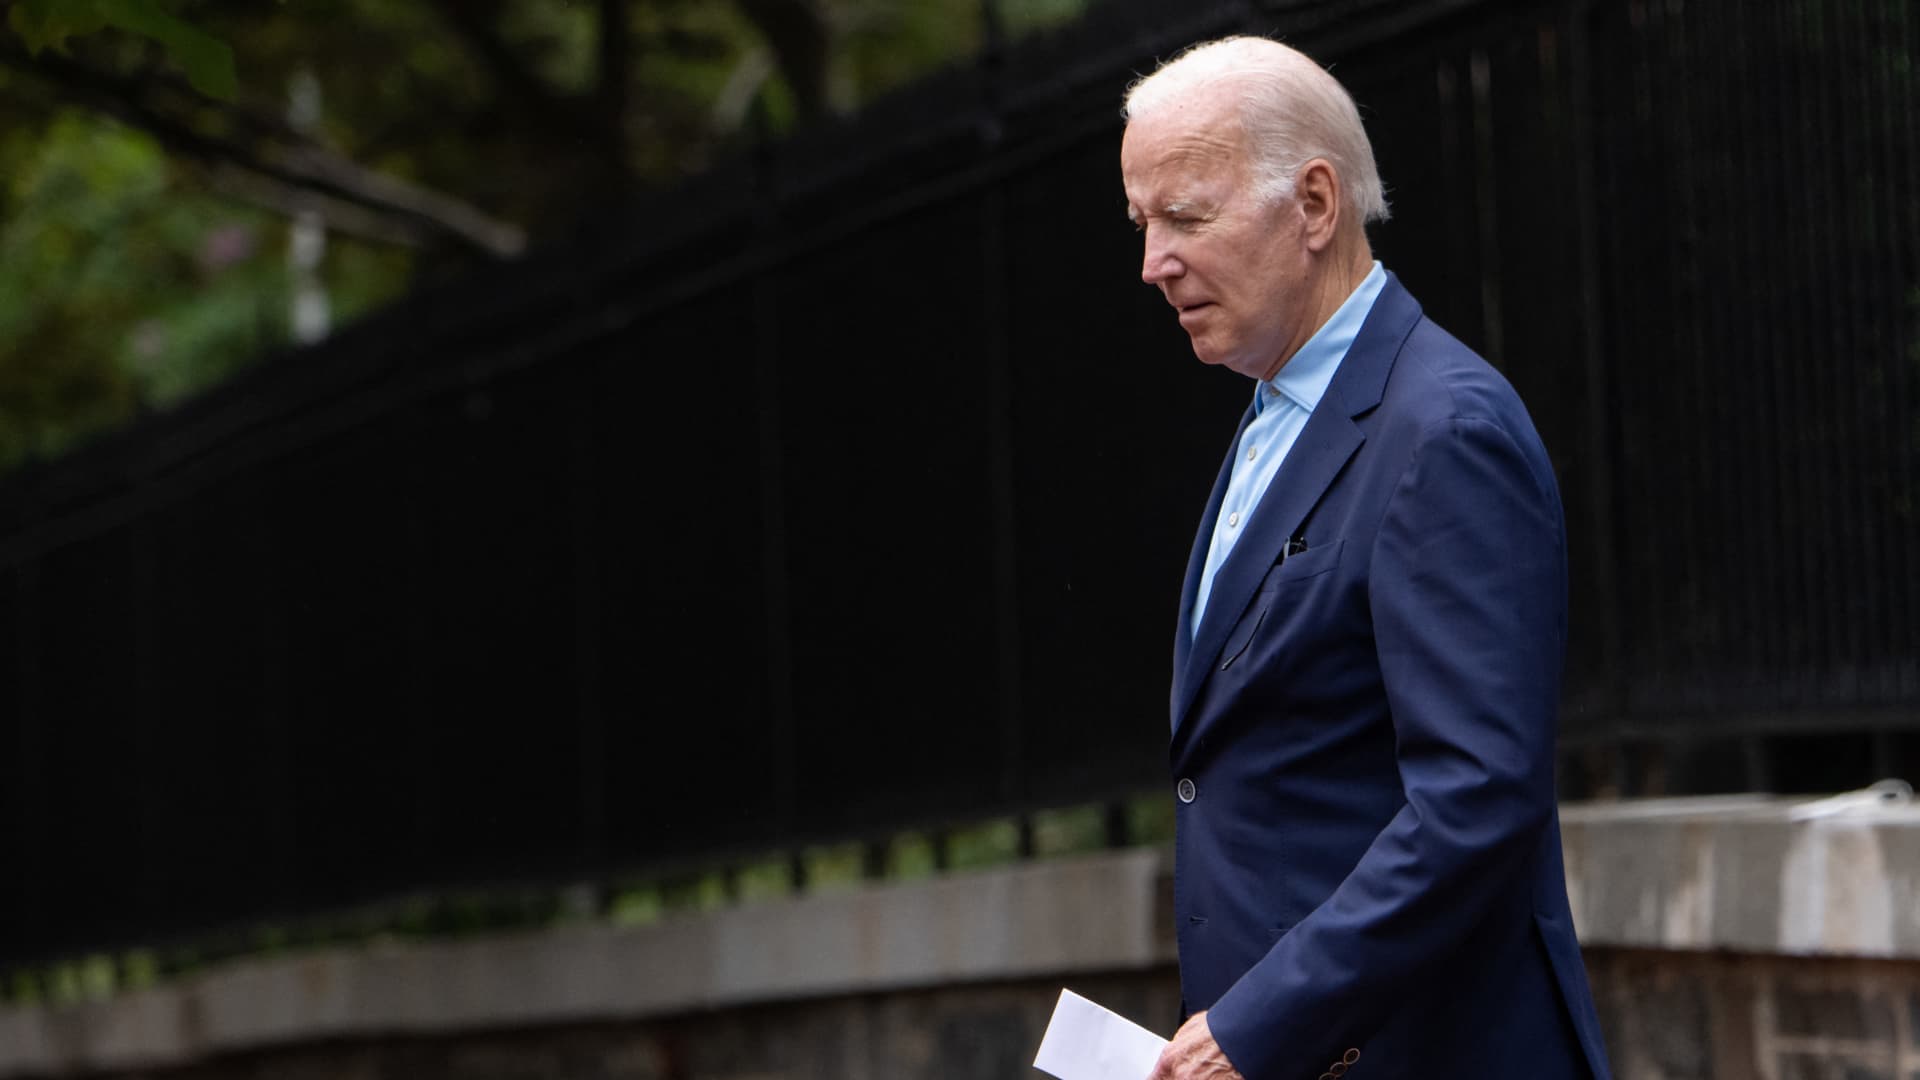 Biden’s economic approval rating falls to new low on fear about inflation, CNBC survey finds